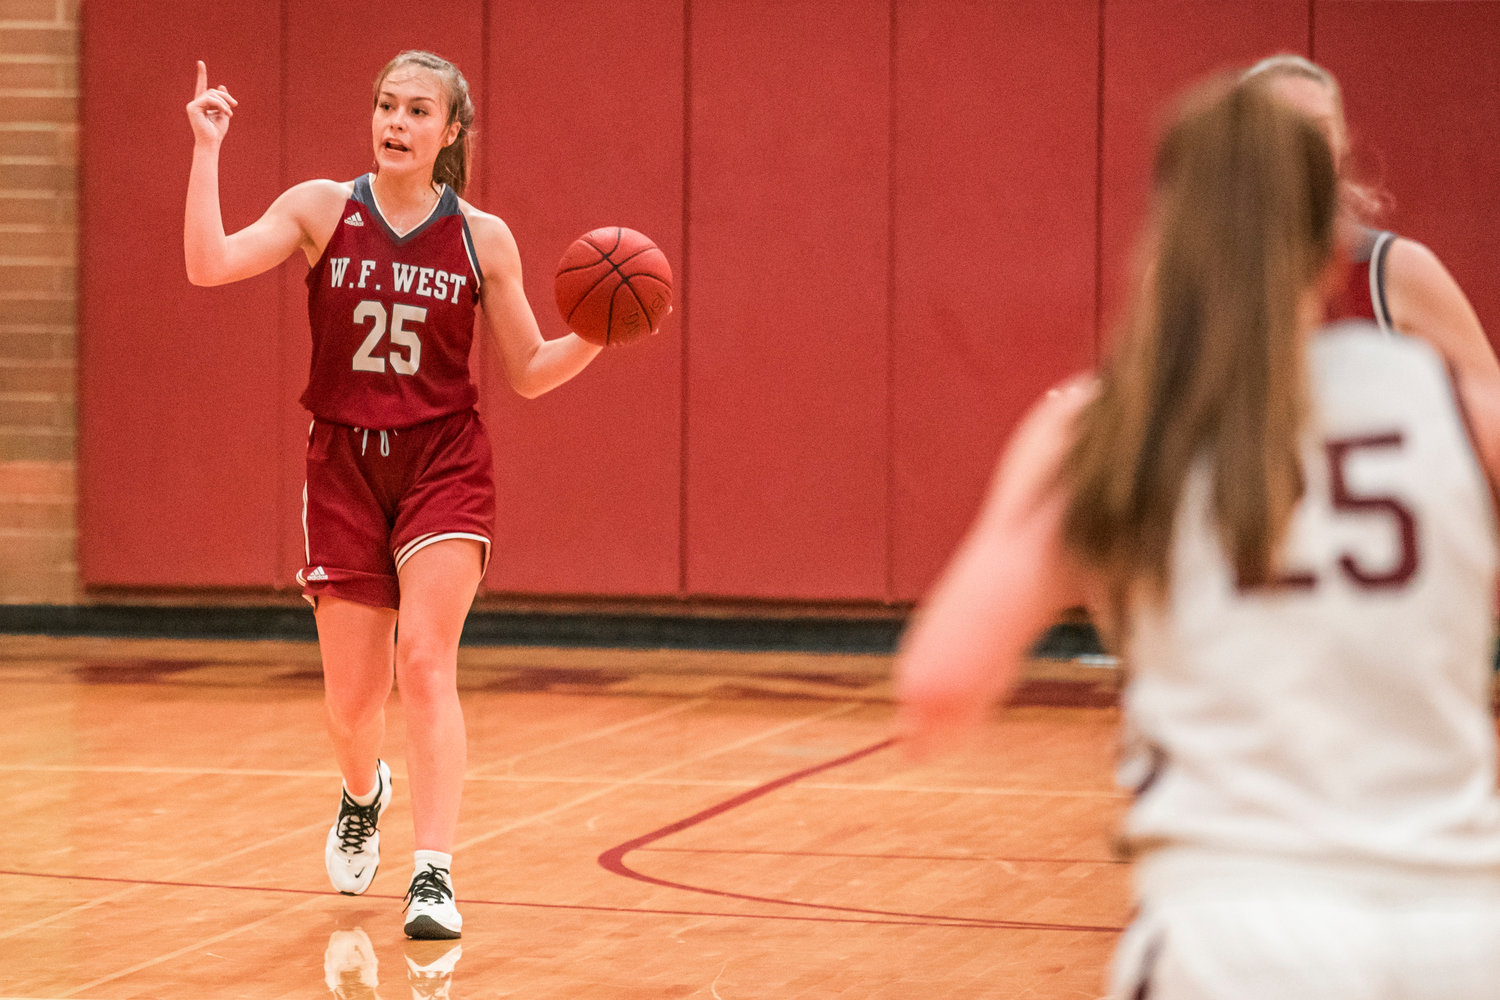 FILE PHOTO -- W.F. West’s Kyla McCallum (25) takes the ball up court during a game against Montesano Tuesday night.